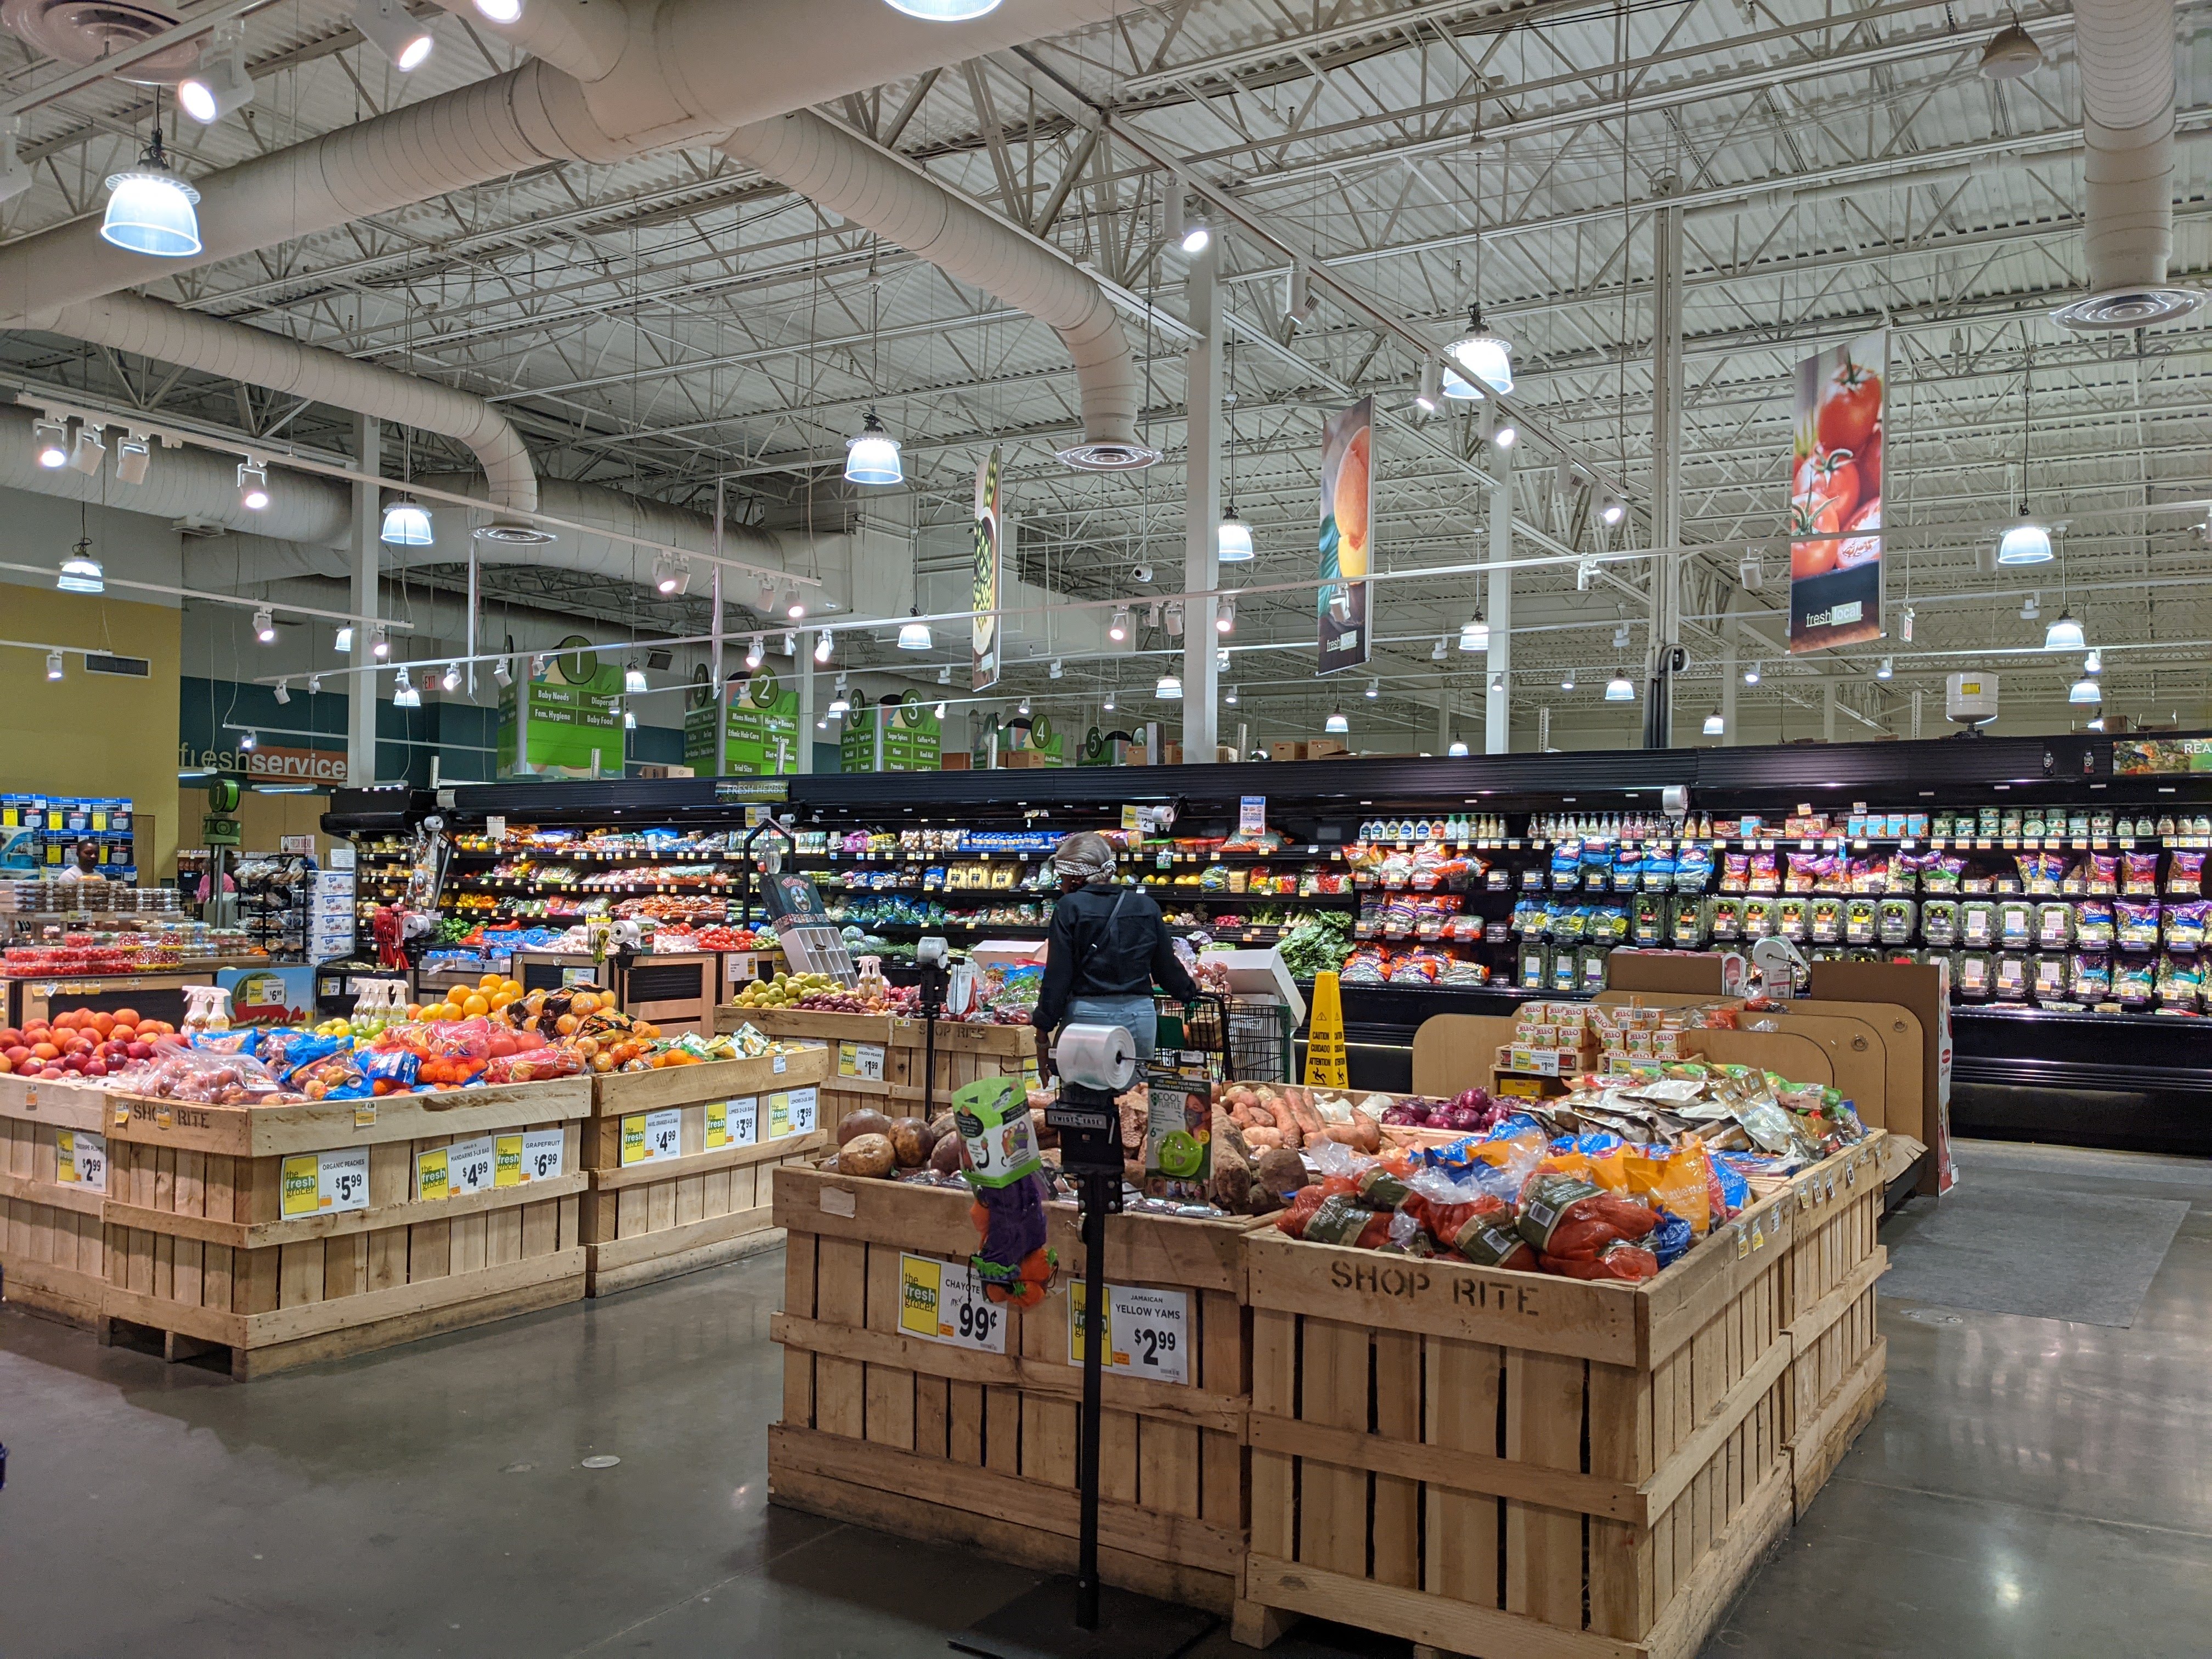 Introducing the first  Fresh grocery store